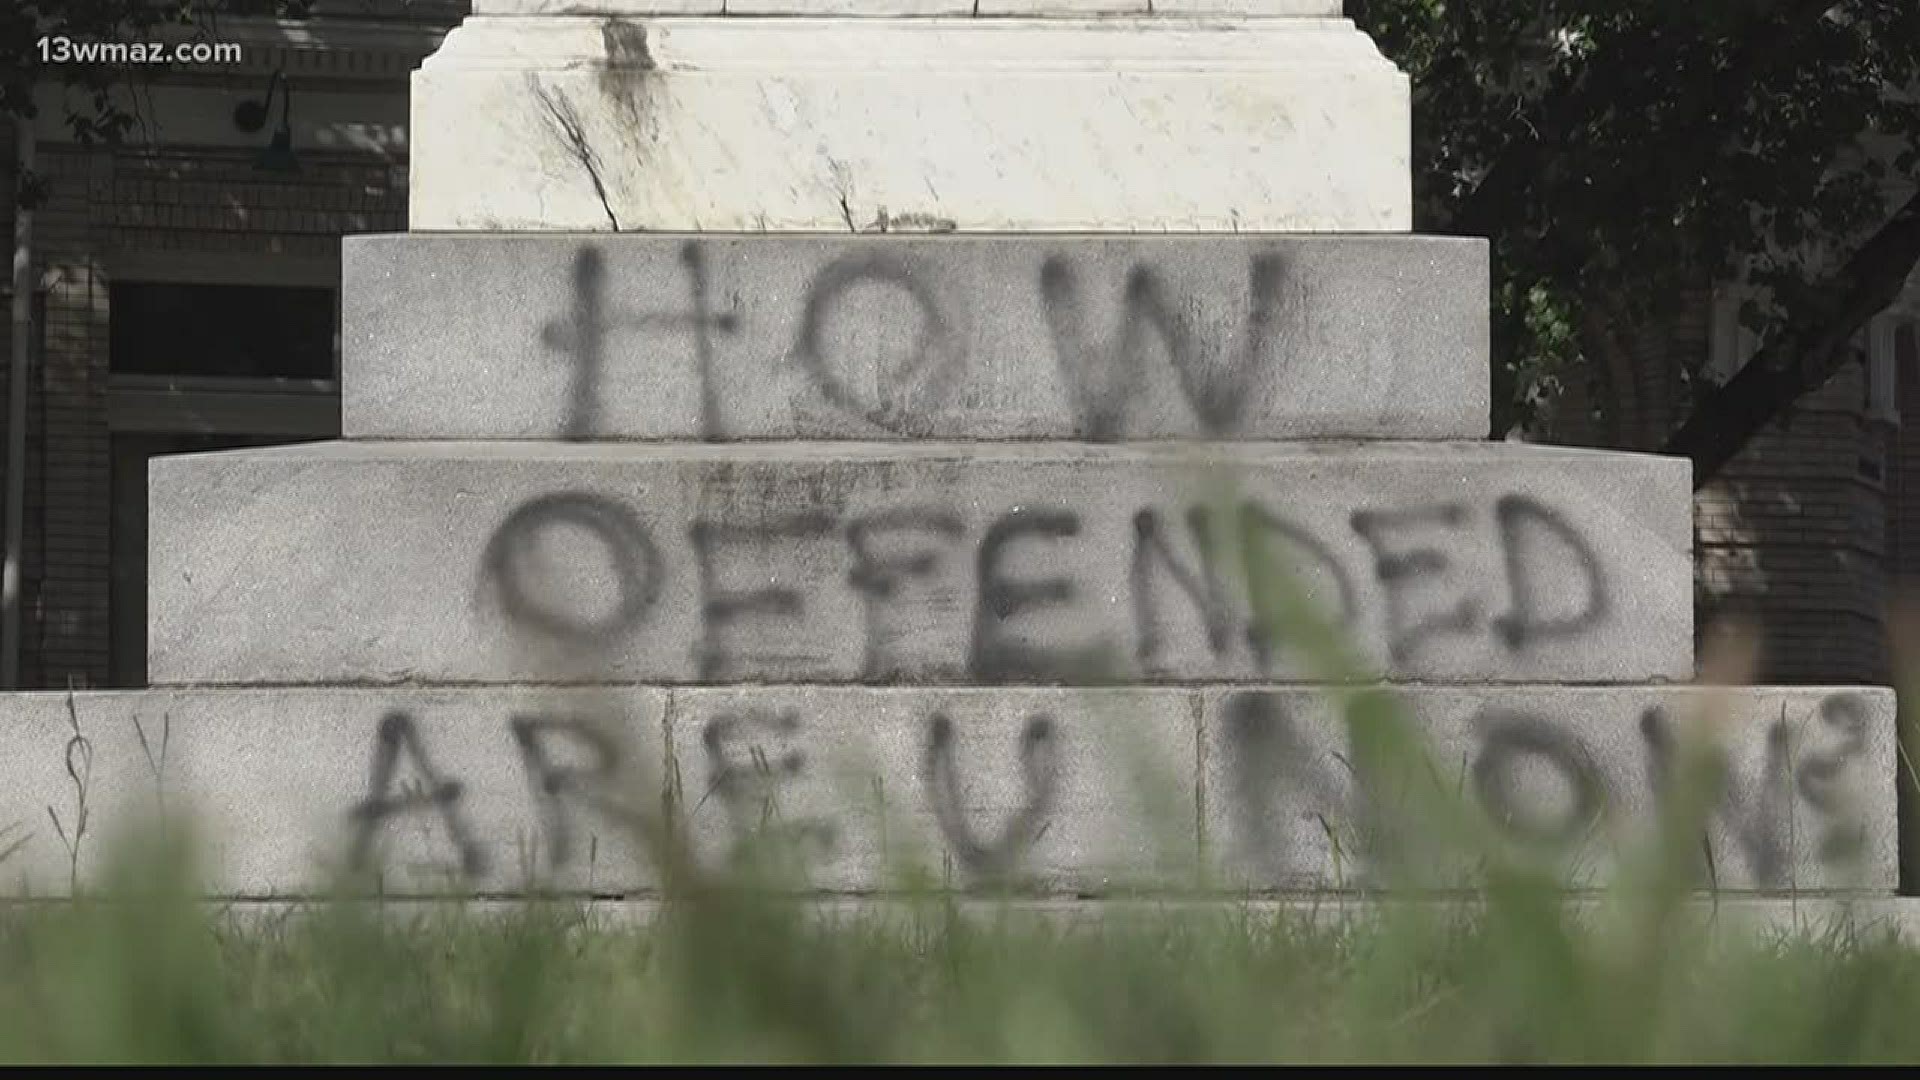 Crews cleaned up a message that read 'How offended are you now?'